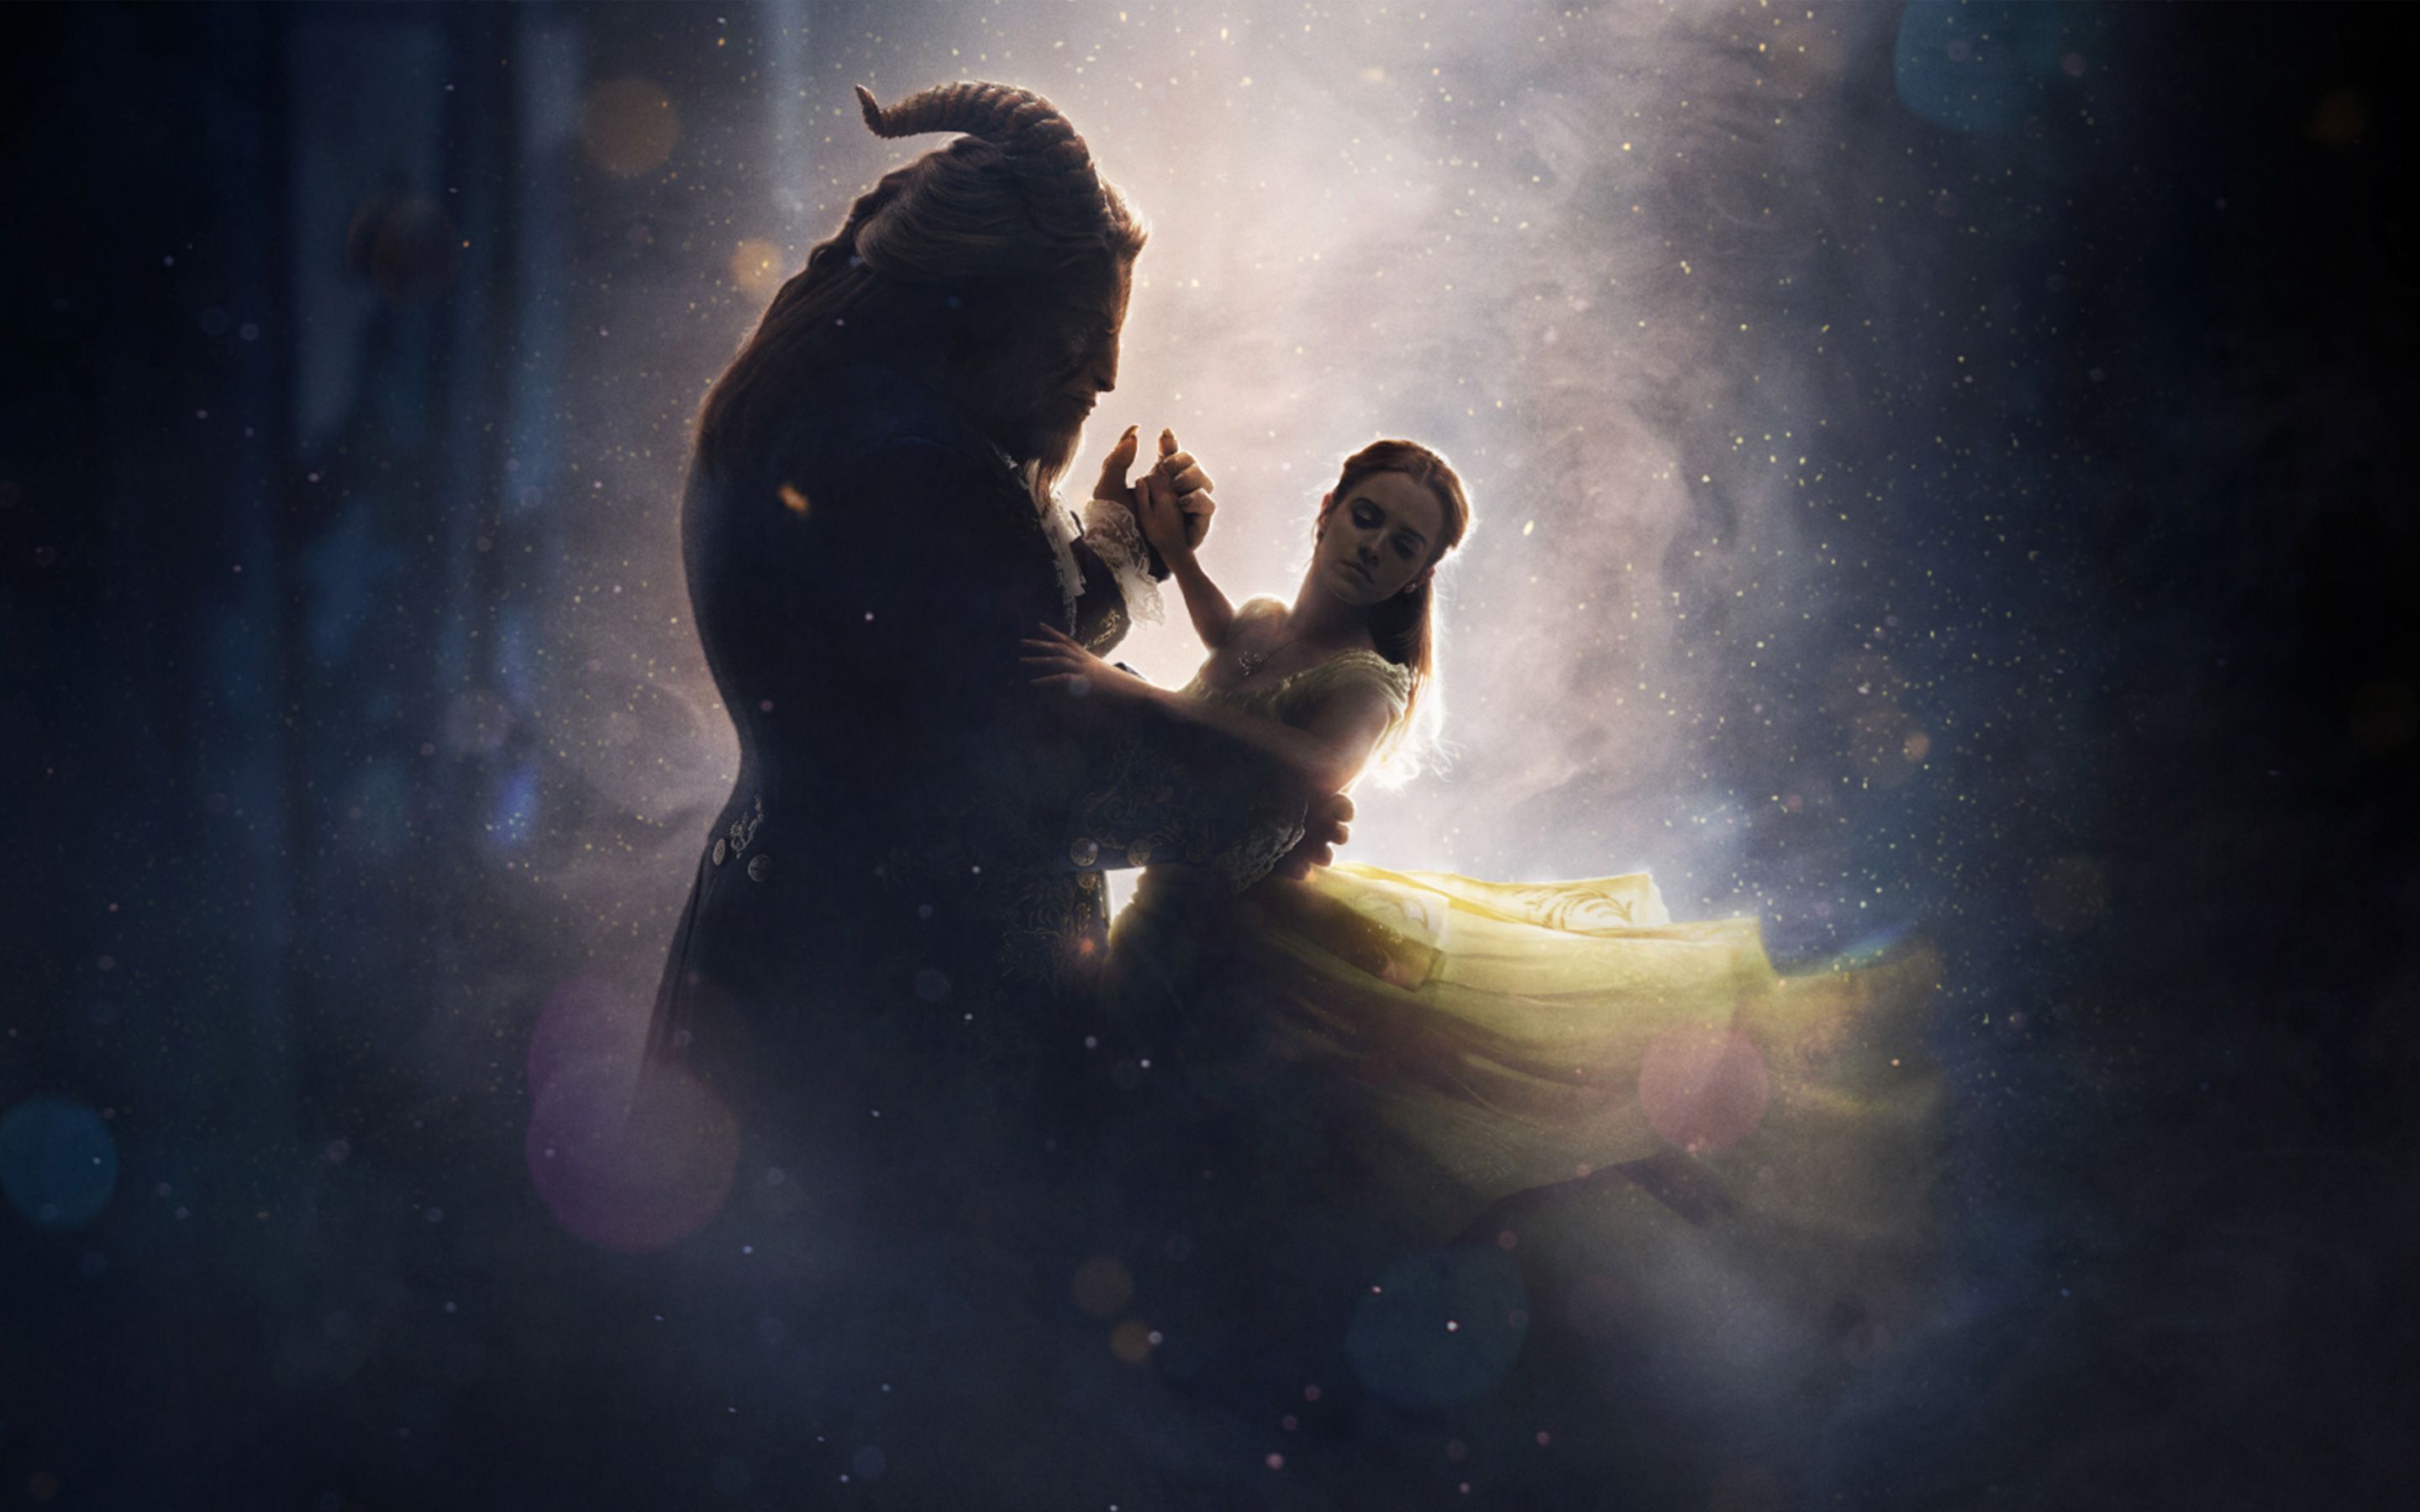 Beauty and the Beast 4K HD wallpaper. Beauty and the beast, Beauty and the beast movie, Beast film